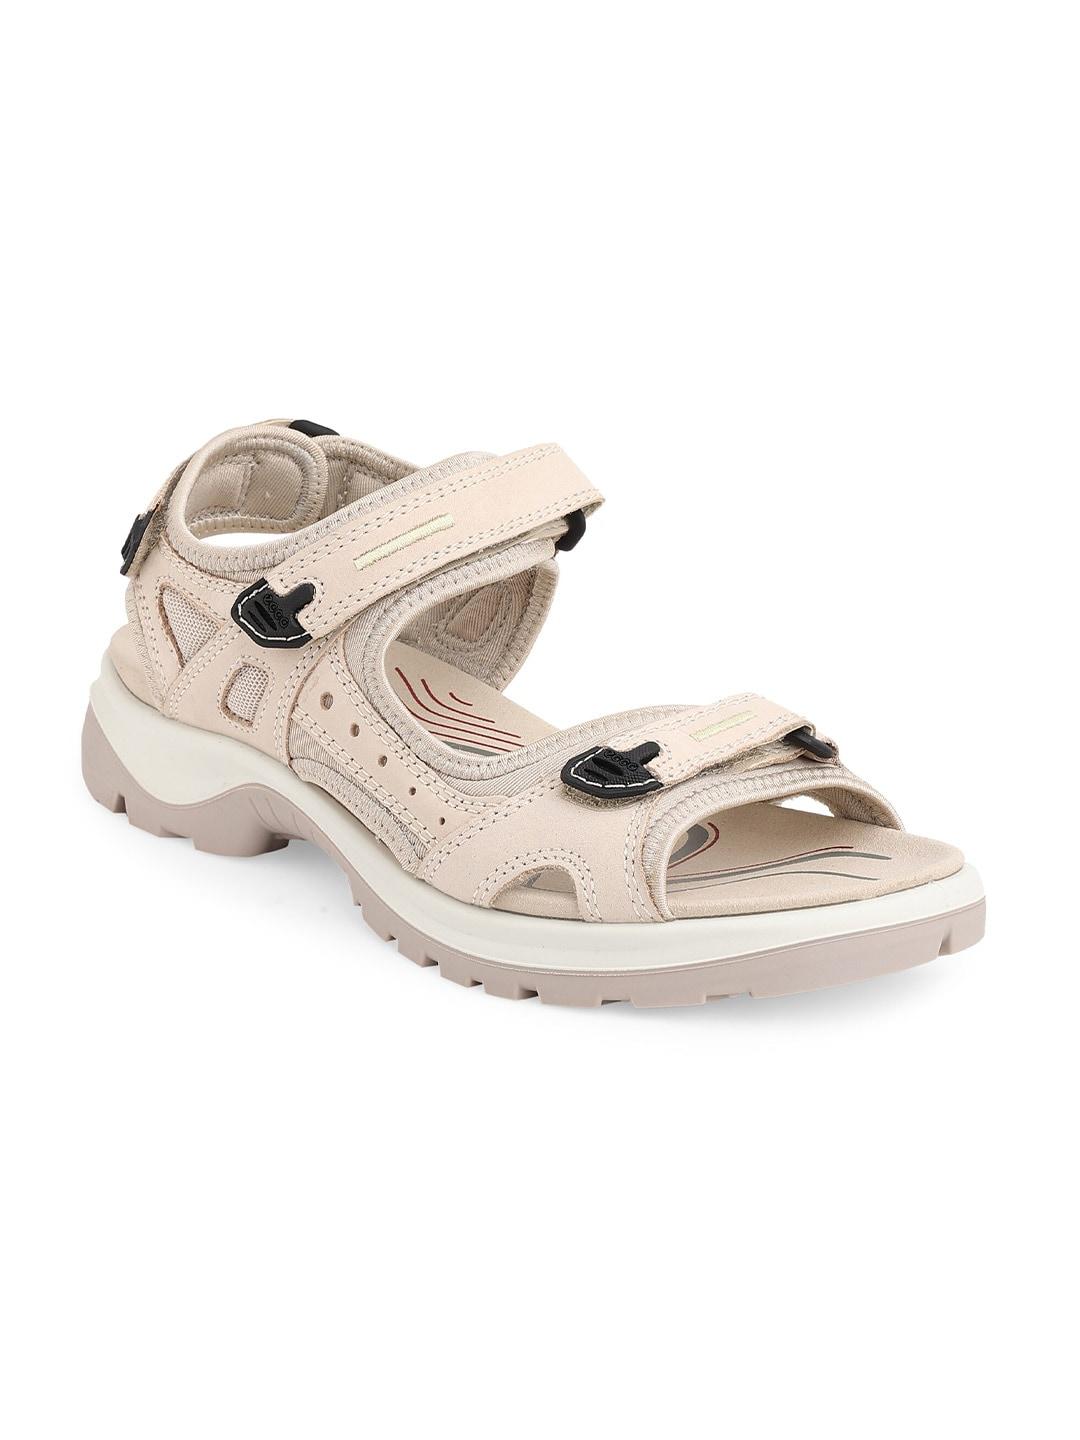 ecco-women-beige-solid-leather-sports-sandals